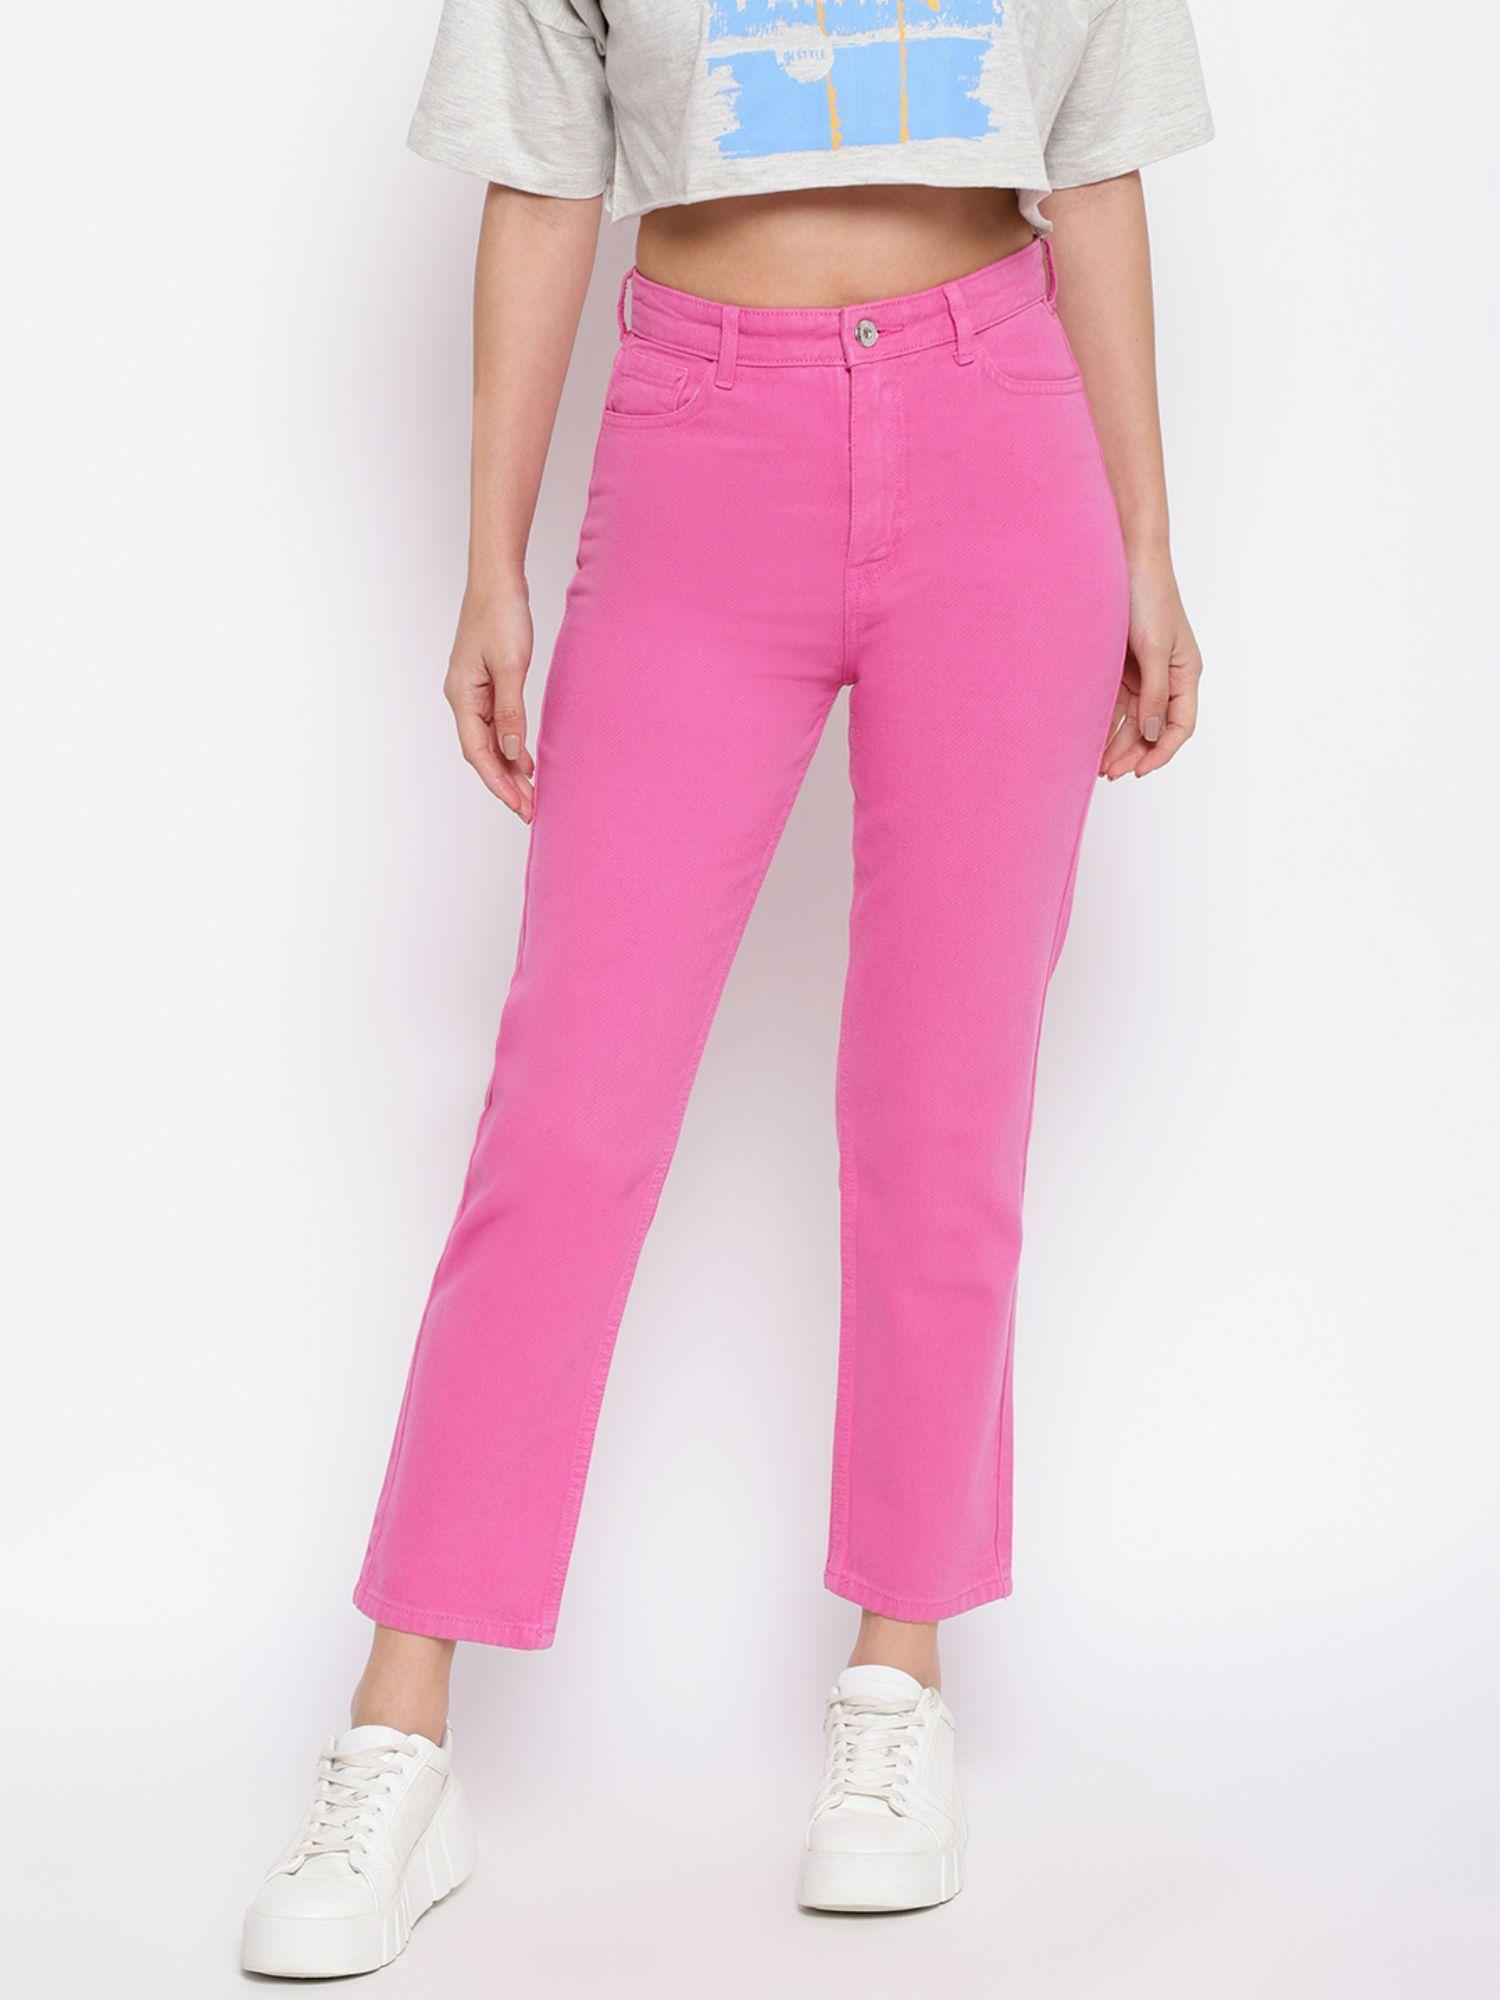 womens pink denim mom fit solid jeans